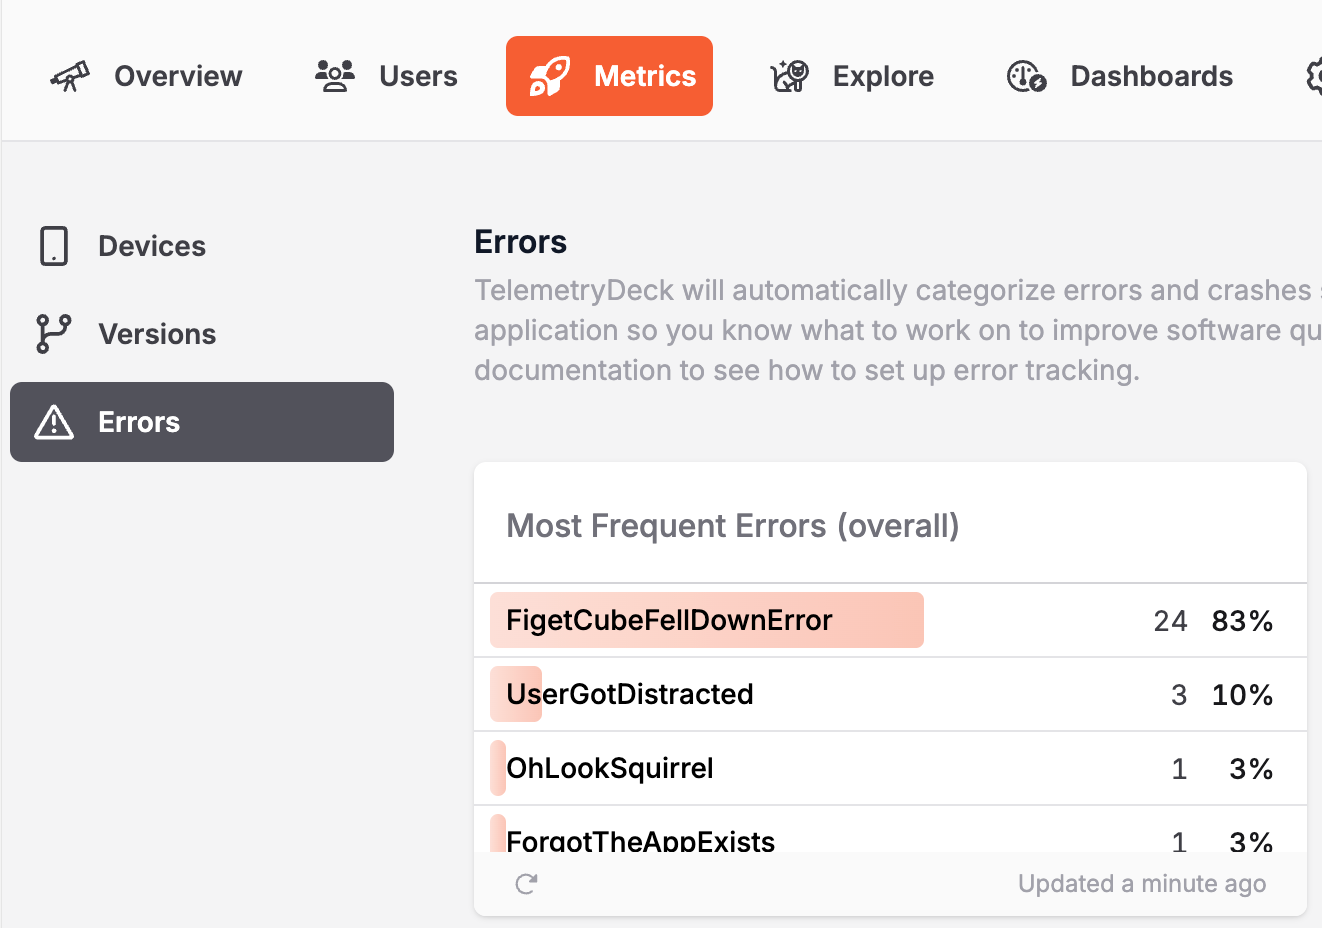 TelemetryDeck's error tracking feature